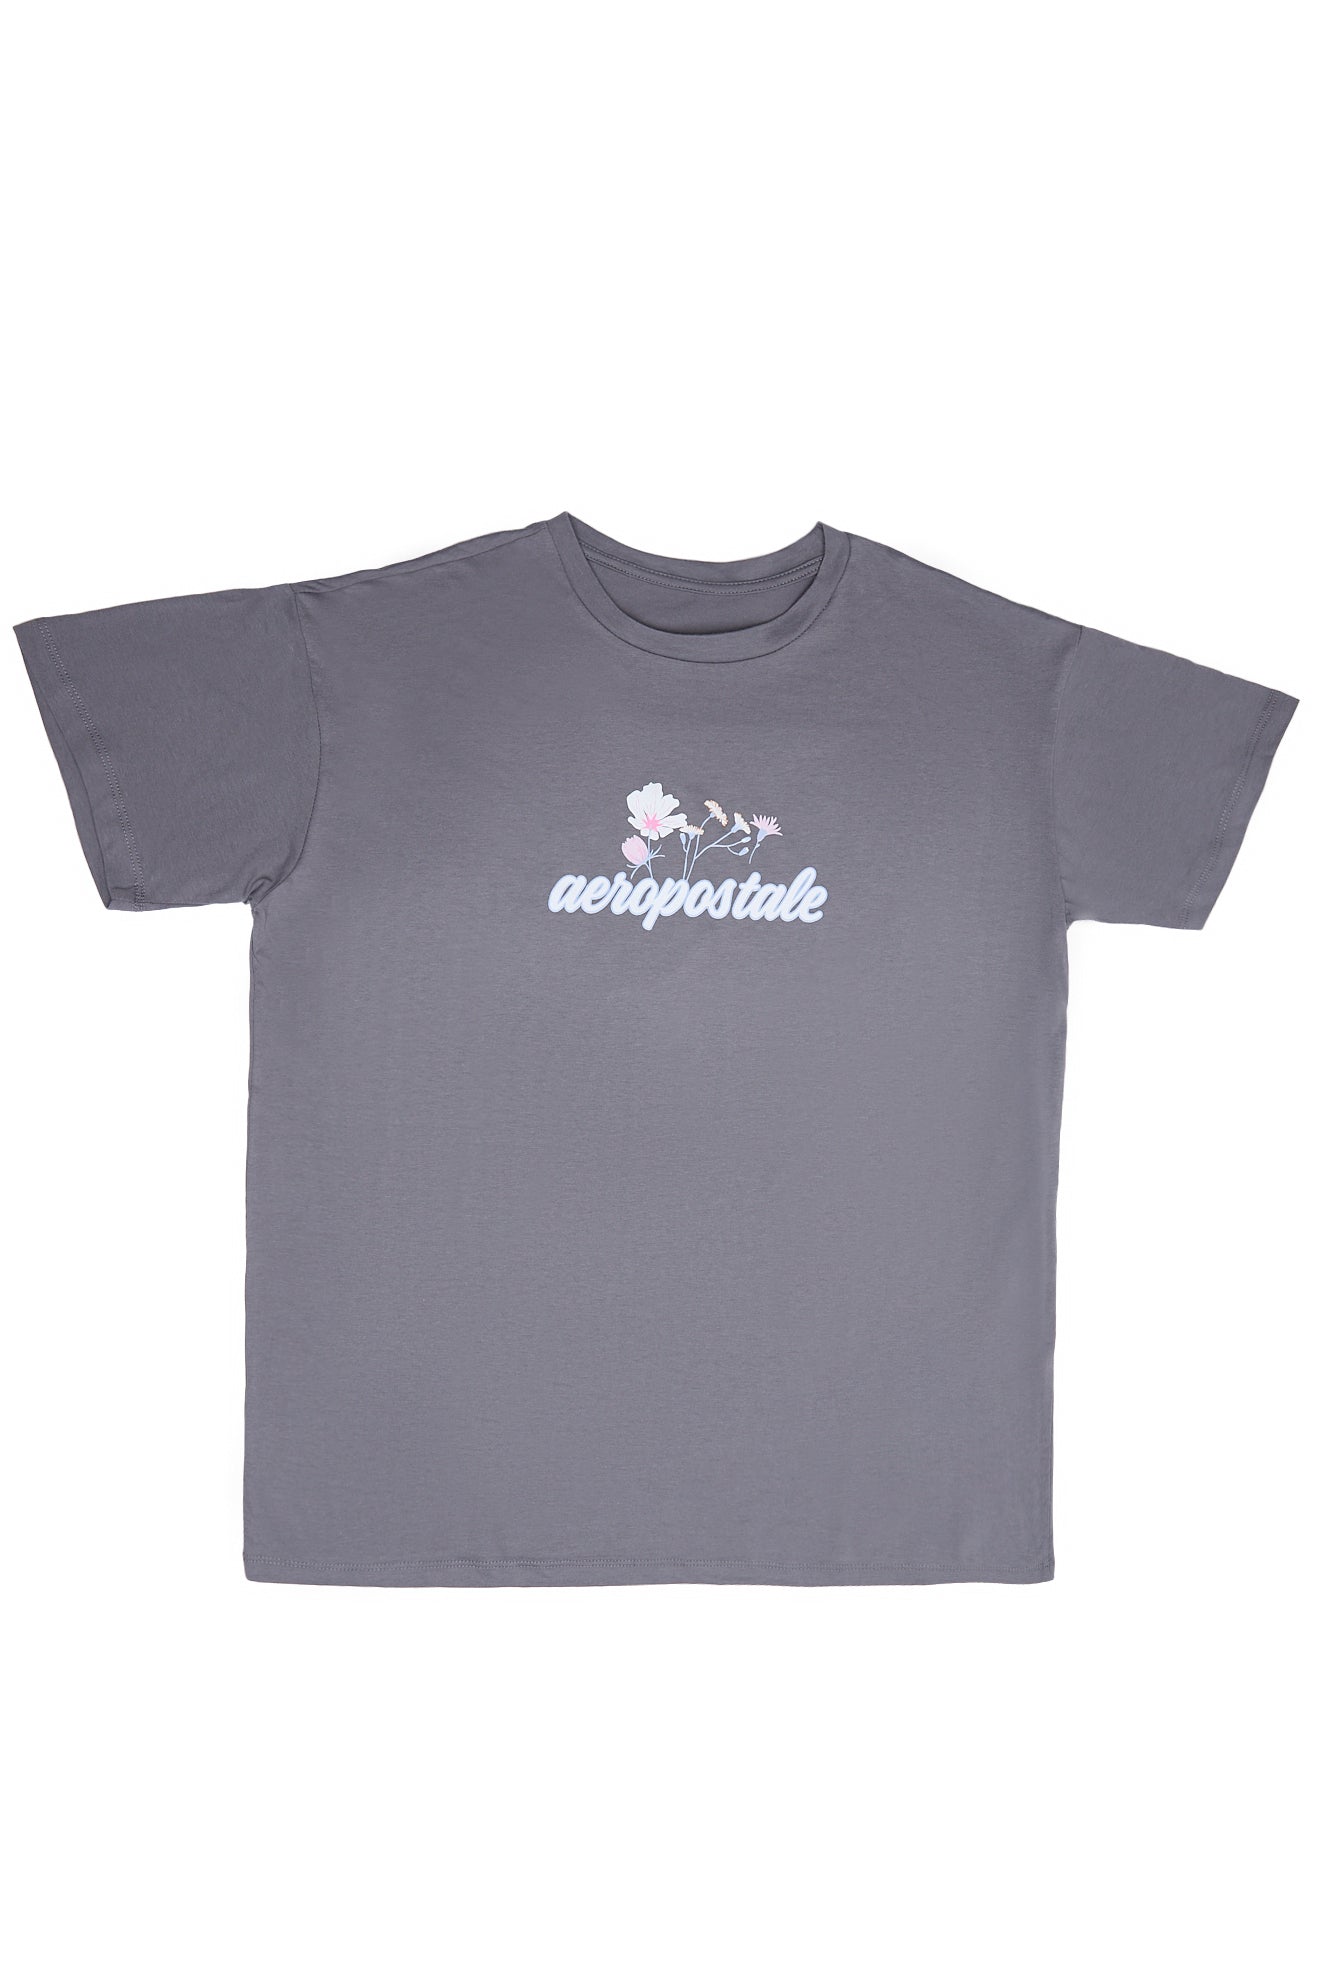 Aéropostale Flowers Graphic Relaxed Tee